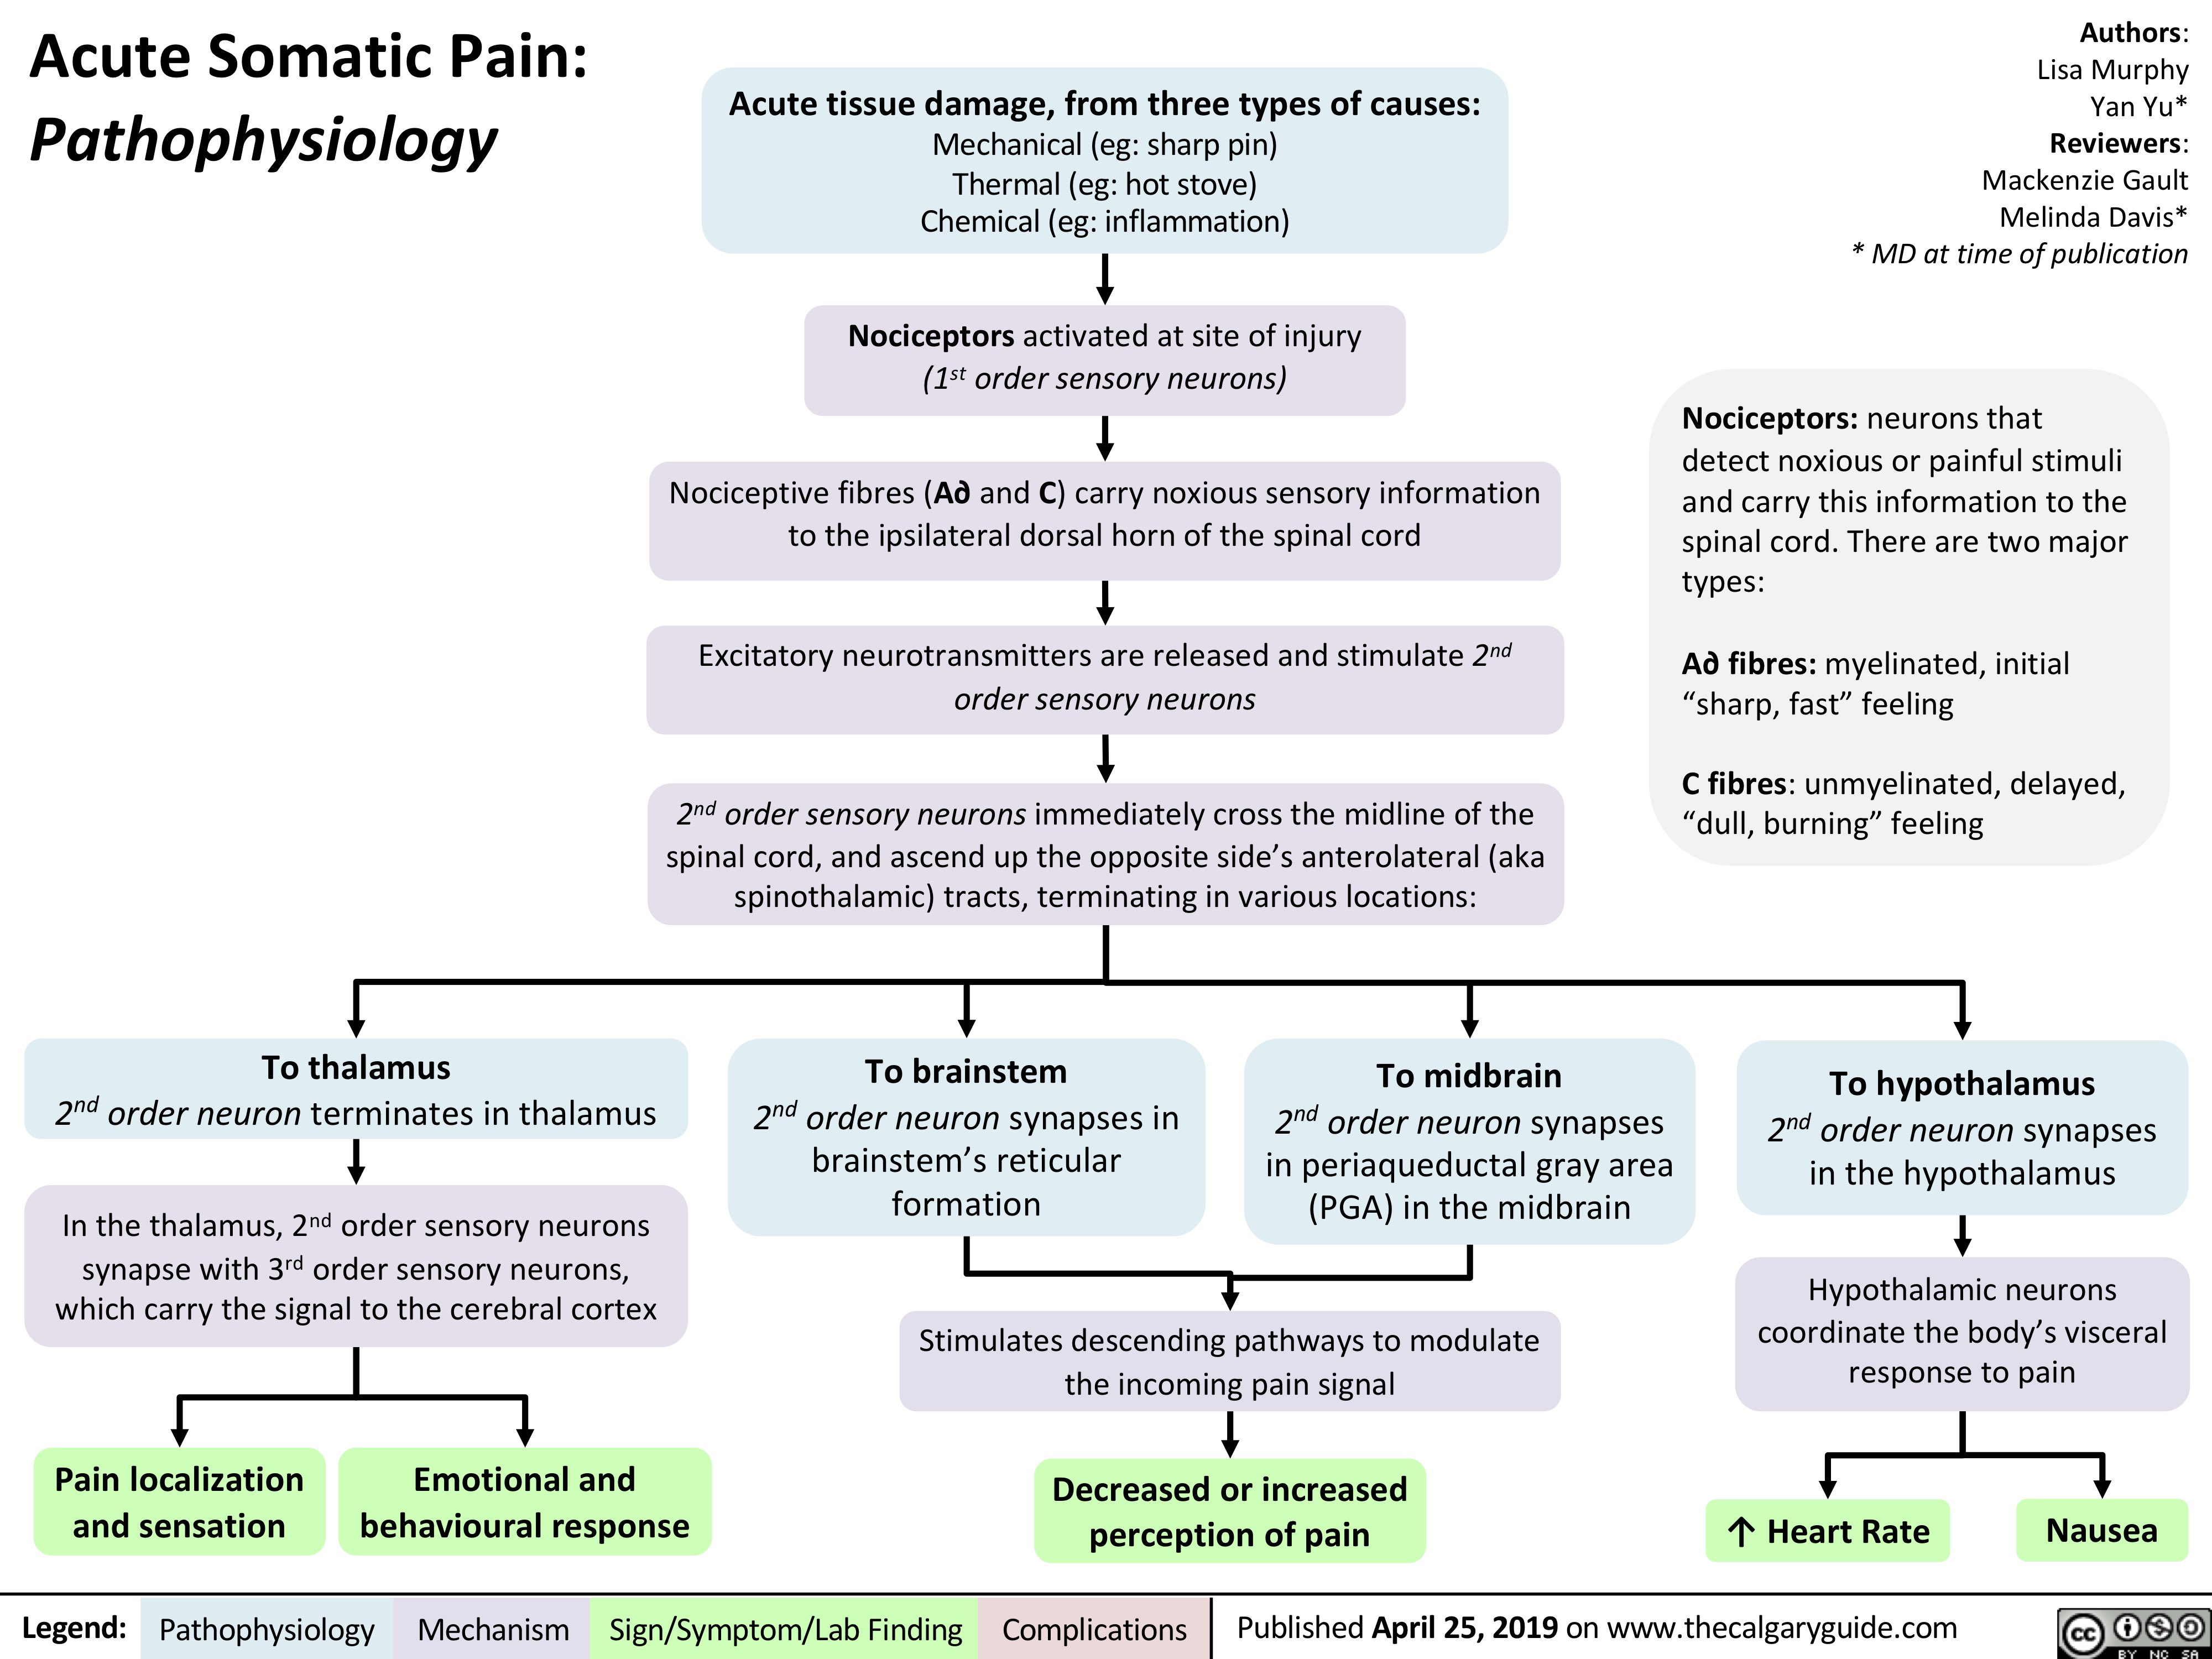 Acute Somatic Pain:
Pathophysiology
Acute tissue damage, from three types of causes:
Mechanical (eg: sharp pin) Thermal (eg: hot stove) Chemical (eg: inflammation)
Nociceptors activated at site of injury (1st order sensory neurons)
Nociceptive fibres (A∂ and C) carry noxious sensory information to the ipsilateral dorsal horn of the spinal cord
Excitatory neurotransmitters are released and stimulate 2nd order sensory neurons
2nd order sensory neurons immediately cross the midline of the spinal cord, and ascend up the opposite side’s anterolateral (aka spinothalamic) tracts, terminating in various locations:
Authors: Lisa Murphy Yan Yu* Reviewers: Mackenzie Gault Melinda Davis* * MD at time of publication
Nociceptors: neurons that detect noxious or painful stimuli and carry this information to the spinal cord. There are two major types:
A∂ fibres: myelinated, initial “sharp, fast” feeling
C fibres: unmyelinated, delayed, “dull, burning” feeling
To hypothalamus
2nd order neuron synapses in the hypothalamus
Hypothalamic neurons coordinate the body’s visceral response to pain
                  2
nd
To thalamus
order neuron terminates in thalamus
To brainstem
2nd order neuron synapses in brainstem’s reticular formation
To midbrain
2nd order neuron synapses in periaqueductal gray area (PGA) in the midbrain
  In the thalamus, 2nd order sensory neurons synapse with 3rd order sensory neurons, which carry the signal to the cerebral cortex
Stimulates descending pathways to modulate the incoming pain signal
Decreased or increased perception of pain
         Pain localization and sensation
Emotional and behavioural response
↑ Heart Rate
Nausea
    Legend:
 Pathophysiology
 Mechanism
Sign/Symptom/Lab Finding
  Complications
Published April 25, 2019 on www.thecalgaryguide.com
   